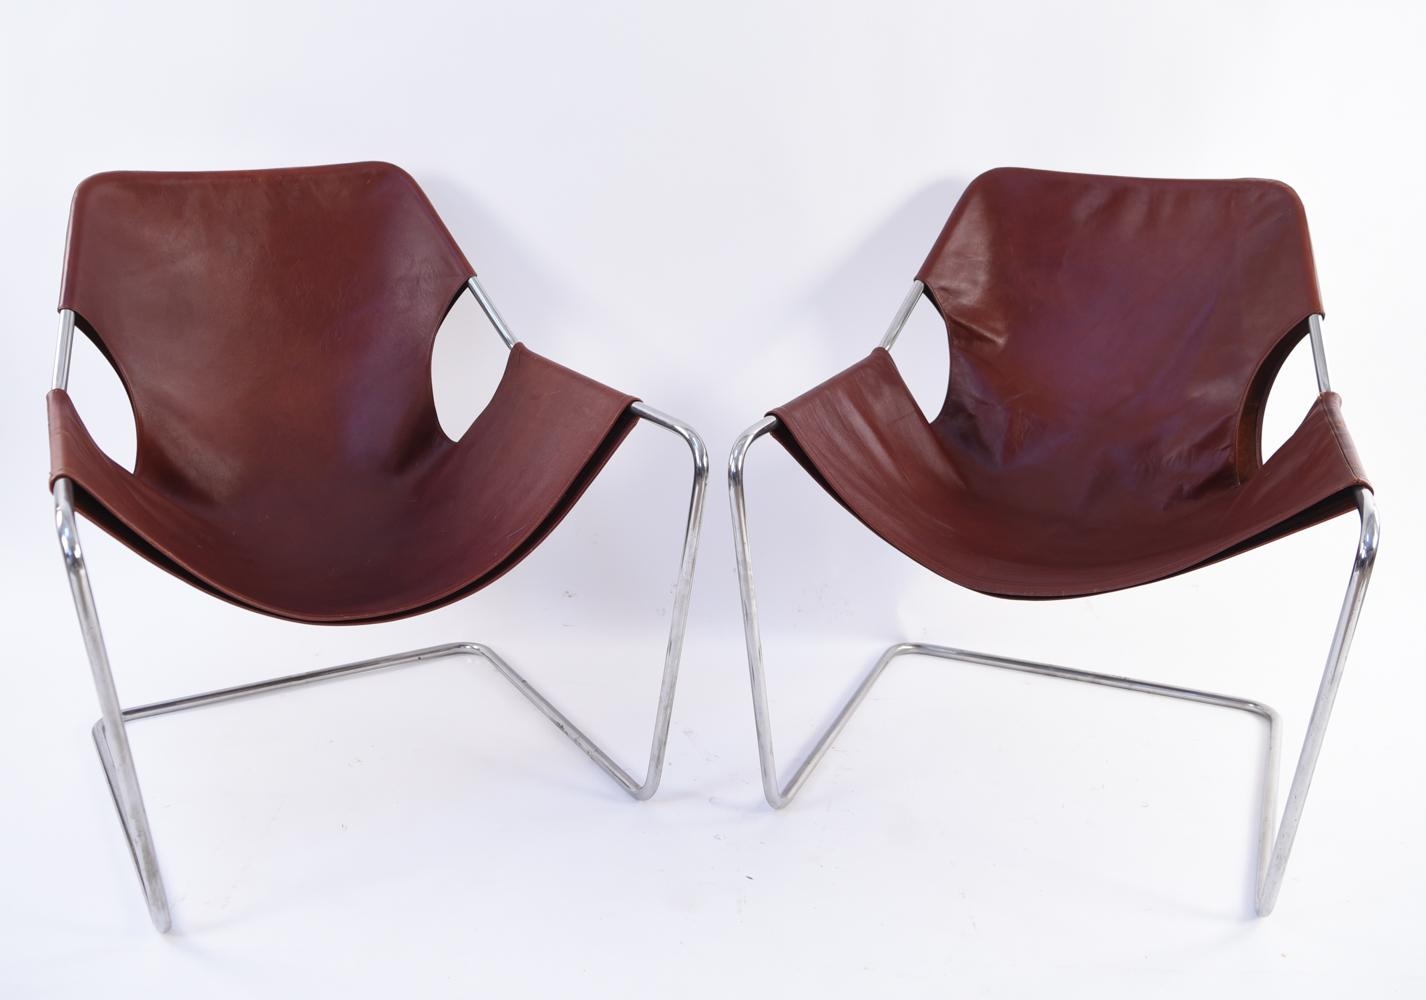 Artwork by Paulo Mendes da Rocha, PAULISTANO CHAIRS, Made of leather